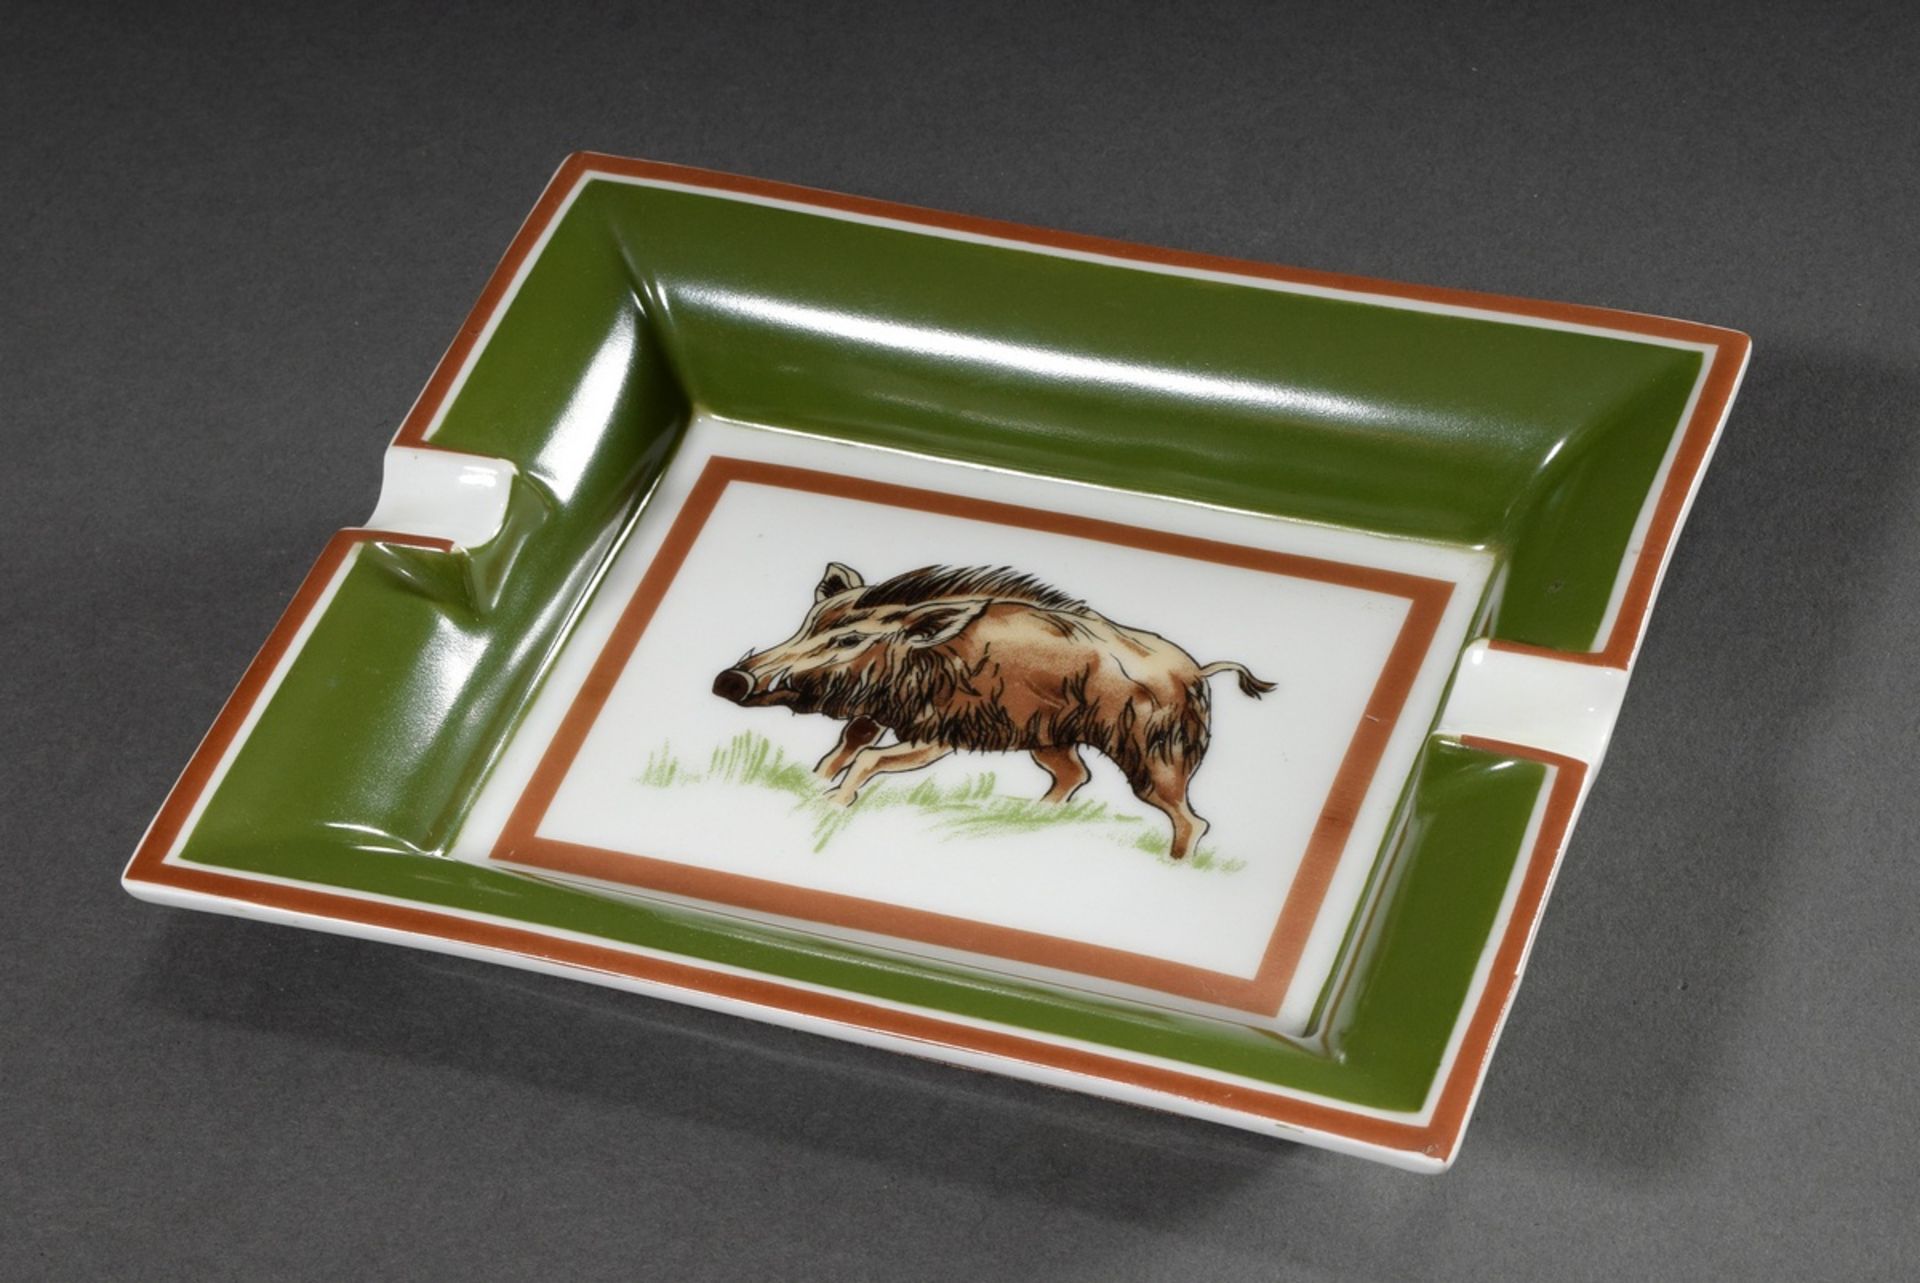 Hermès porcelain ashtray "Keiler", coloured print decoration in green/brown, 19x18cm, some rubbing - Image 2 of 5